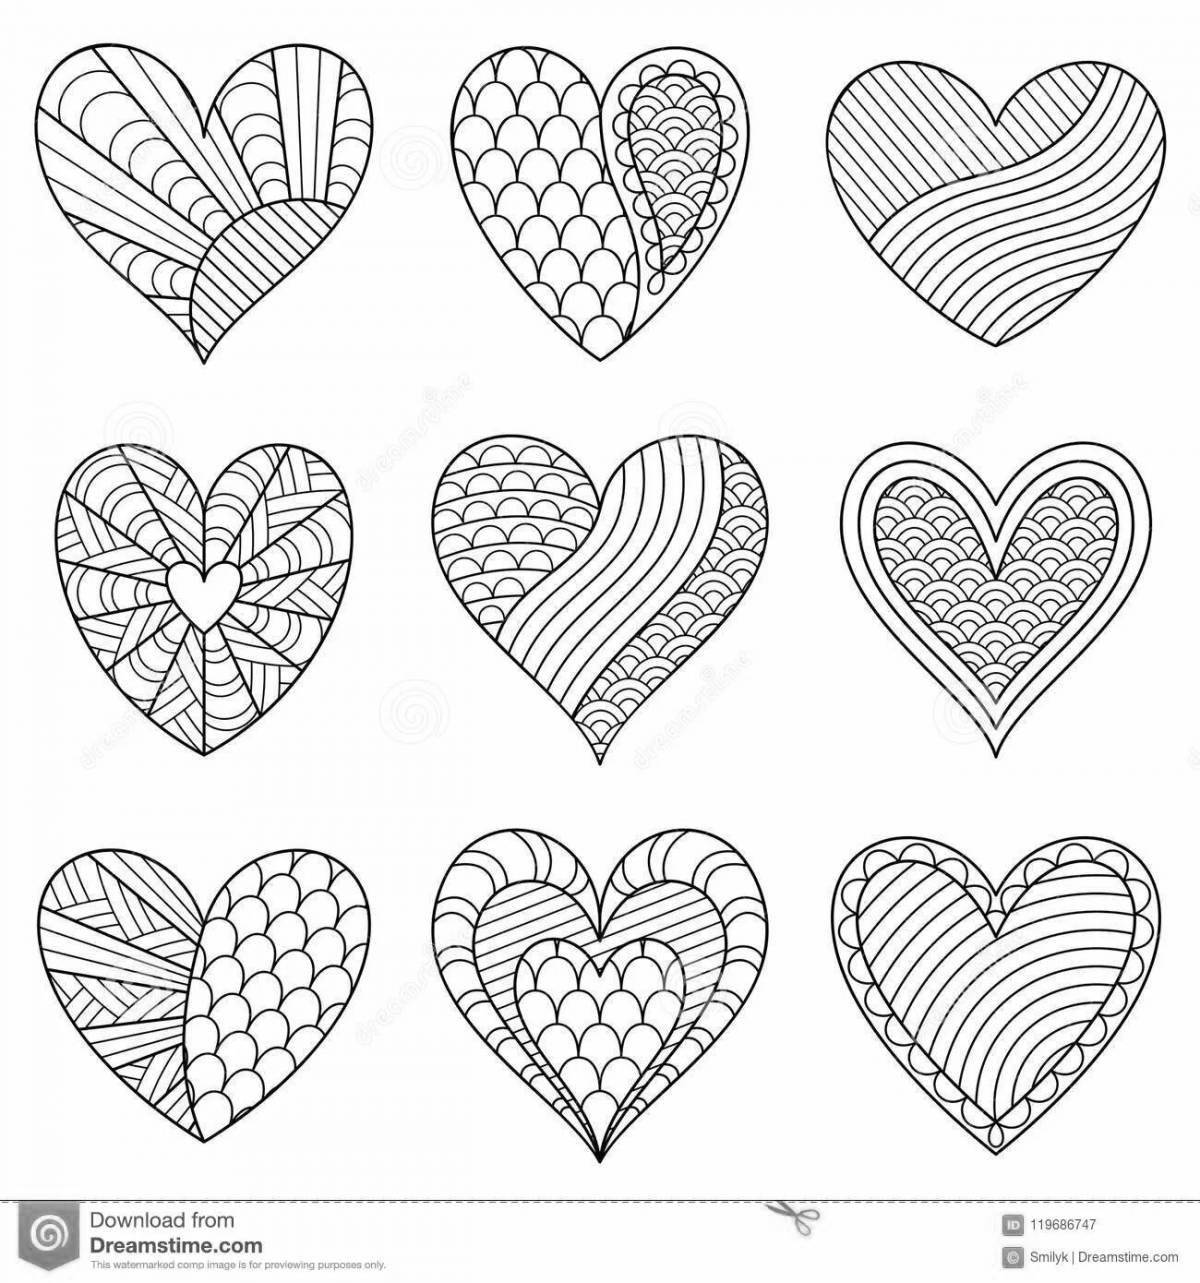 Coloring page with colorful hearts